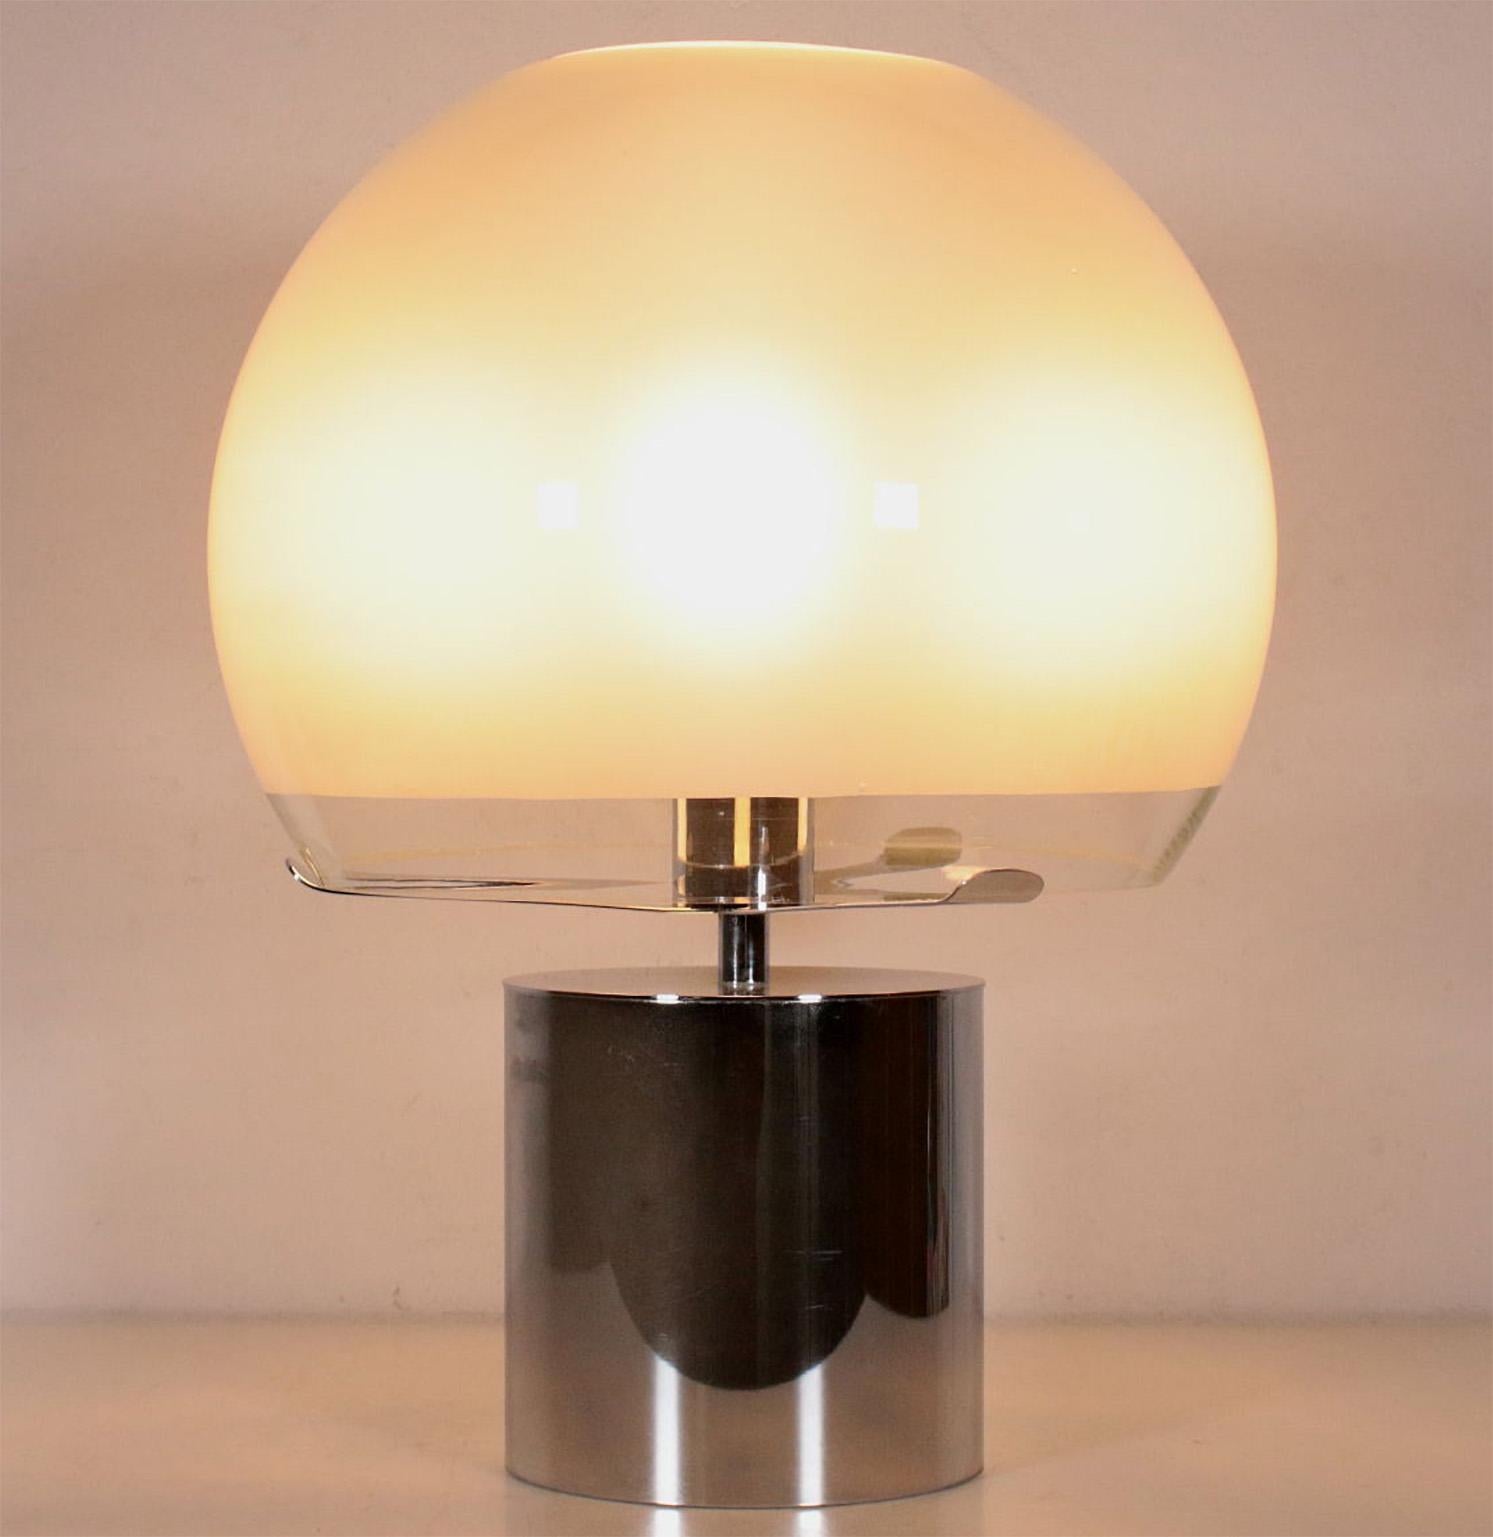 Monumental and fine table lamp designed in 1966 by the famous architect Luigi Caccia Dominioni for Azucena Manufacture; modello LTA6 “Porcino”
The Chromed brassstrcture holds the large and beautiful glass reflector. ( 45 cm diemeter!)
The switch